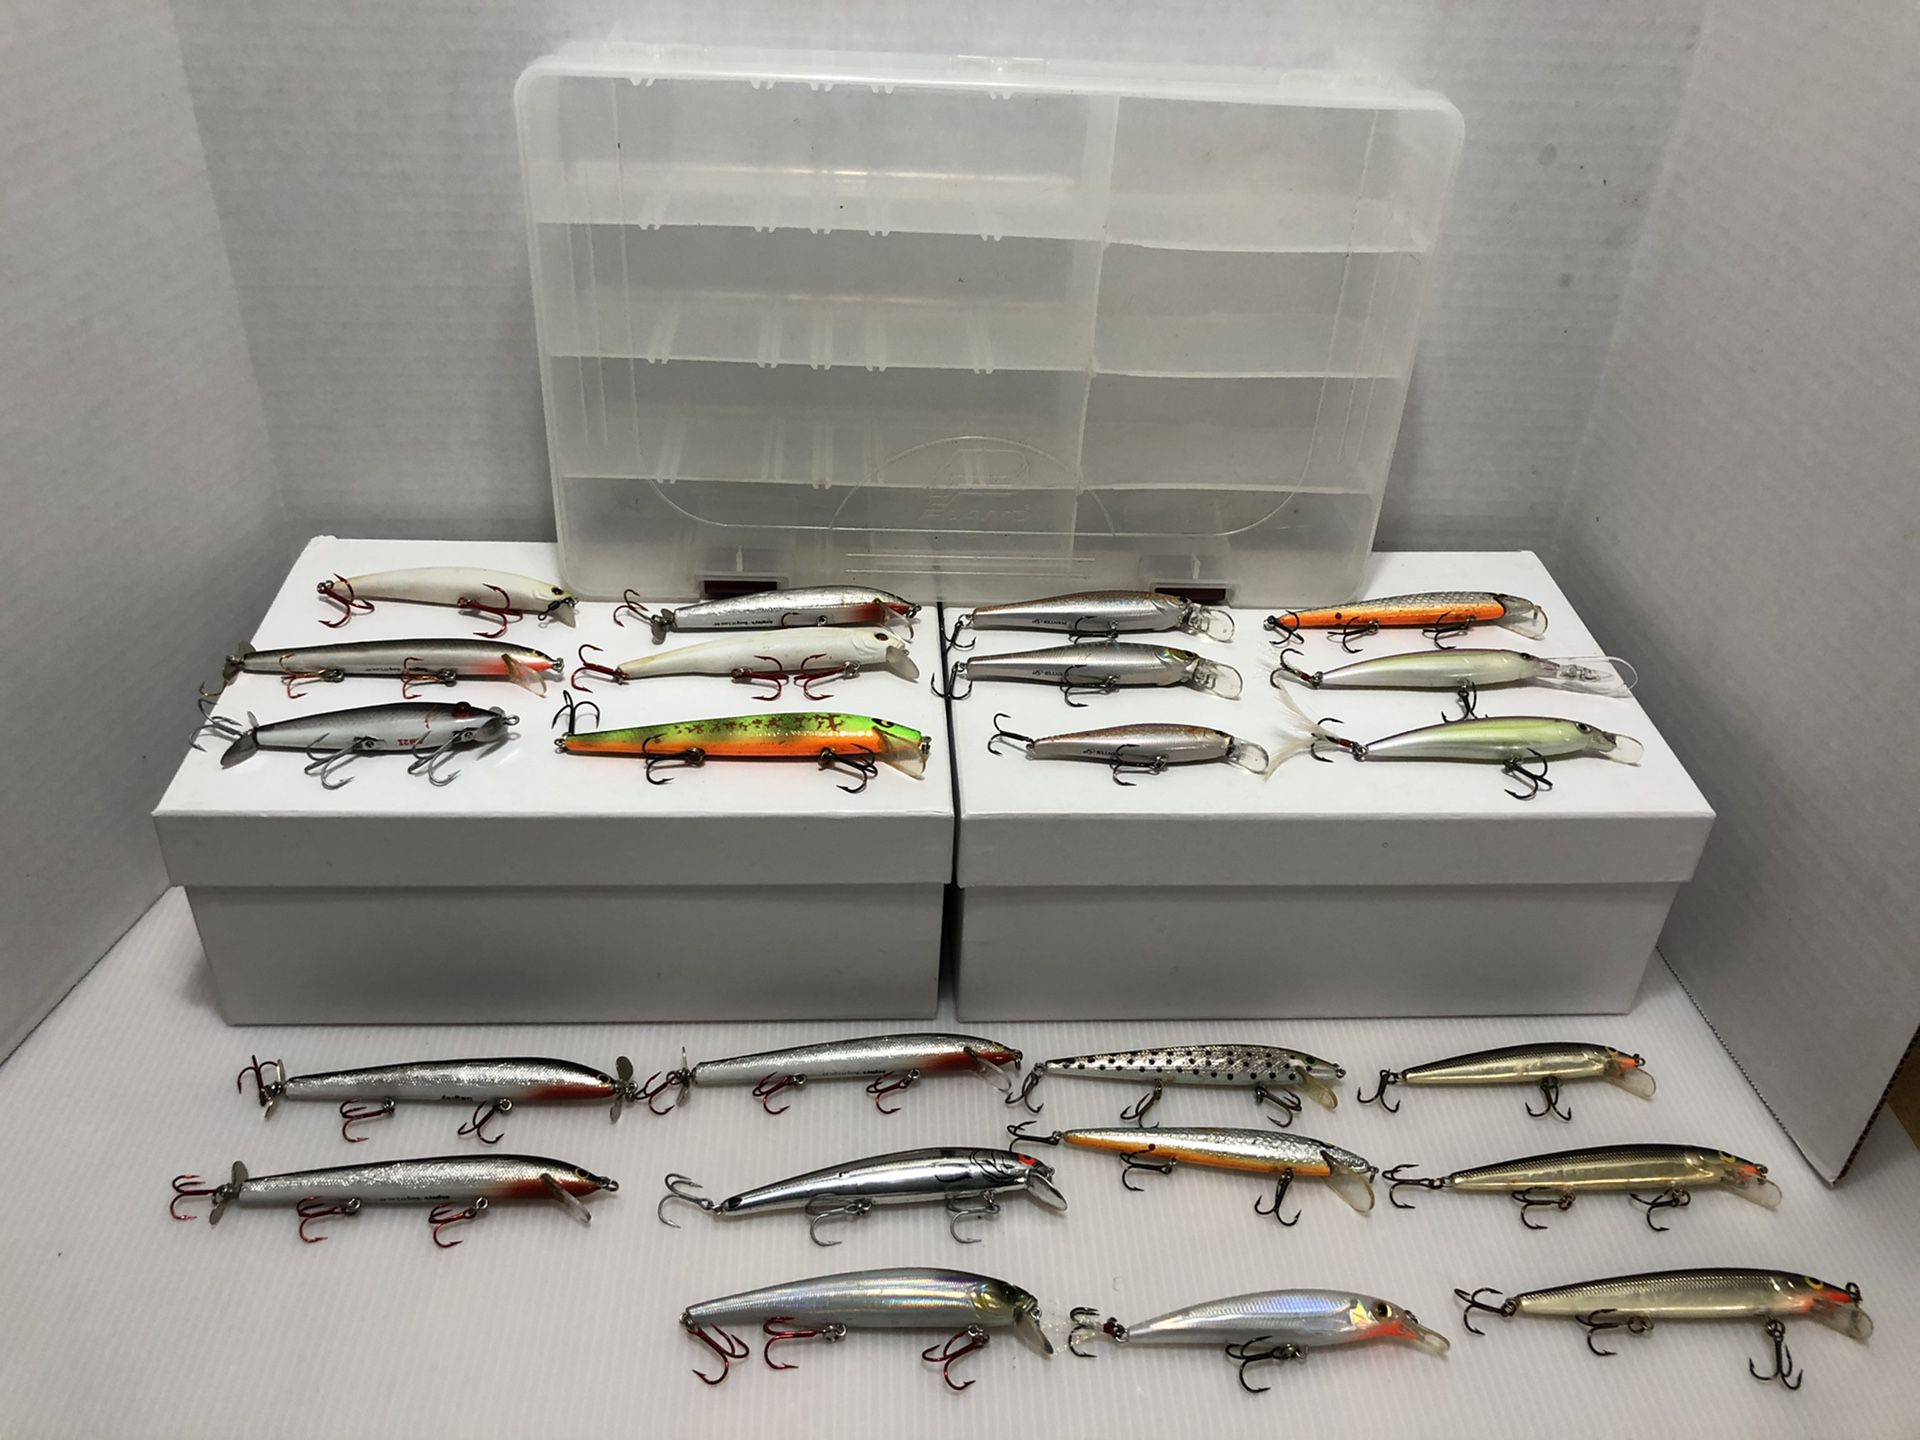 23 Fishing Lures with tackle box